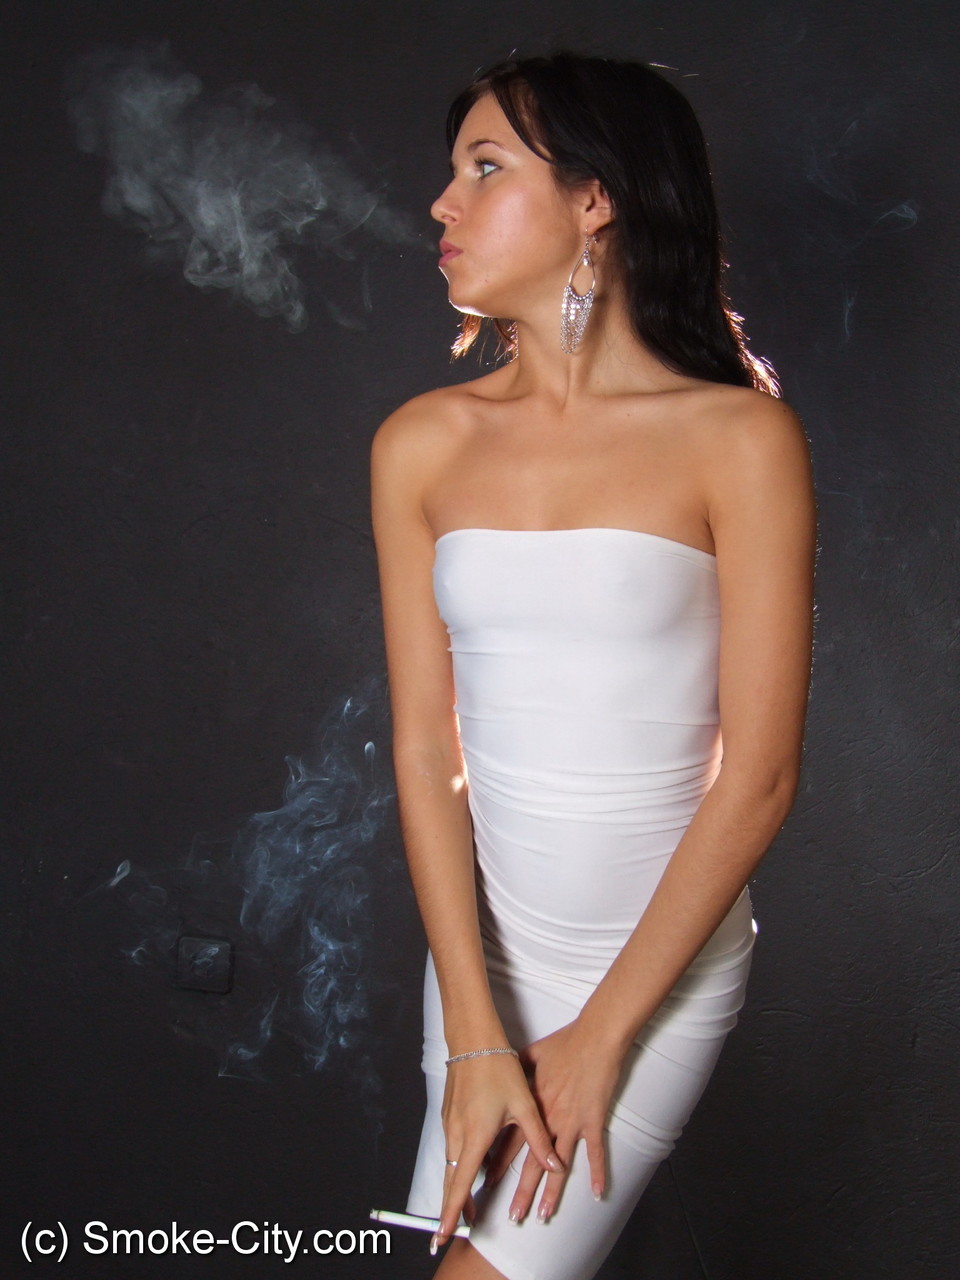 Young brunette smokes a cigarette while wrapped in tight white dress and heels 色情照片 #426521983 | Smoke City Pics, Alisa Bitch, Smoking, 手机色情